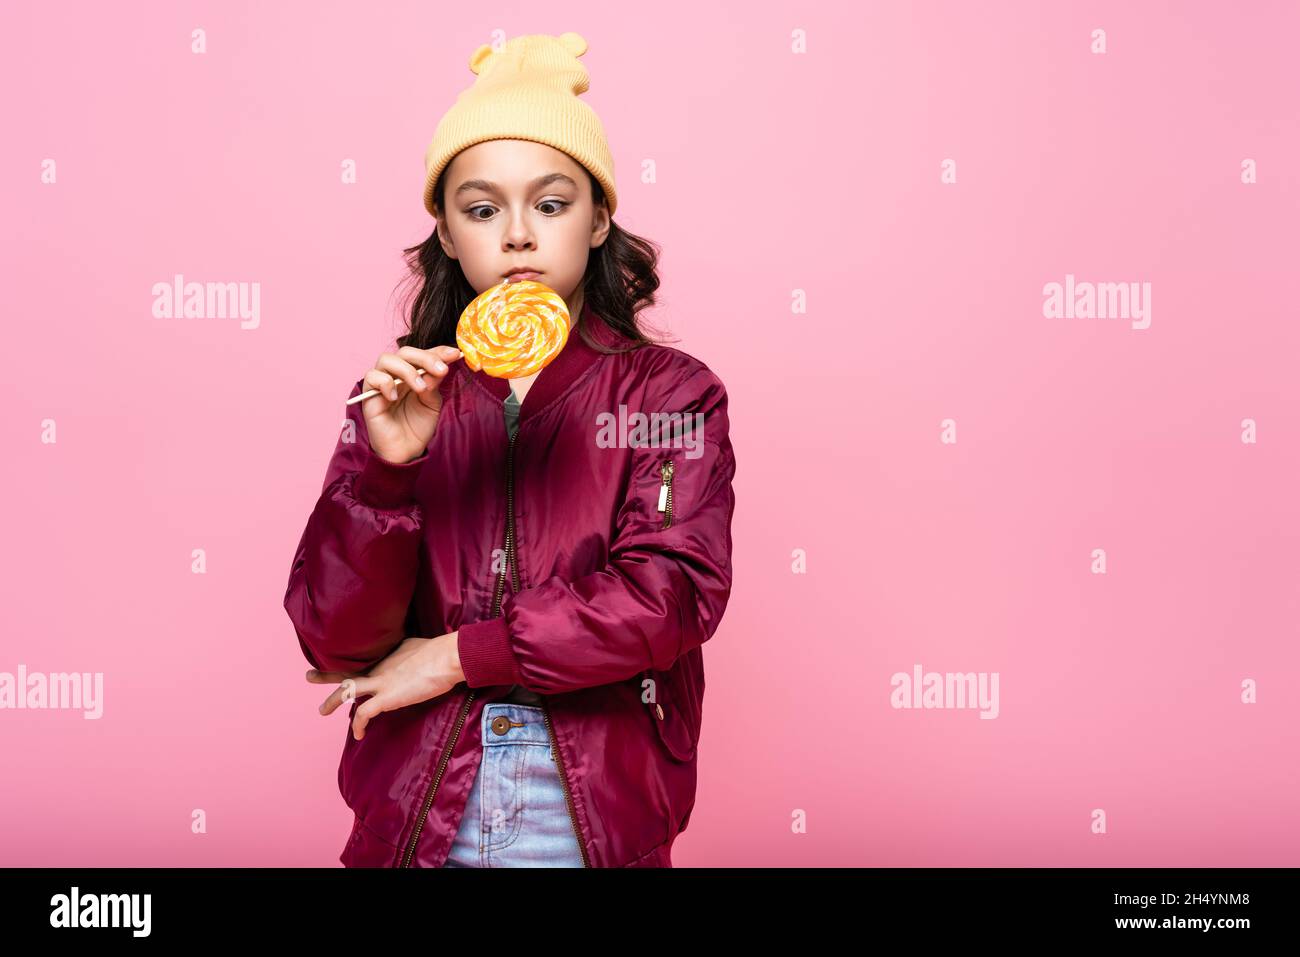 stylish preteen girl in winter outfit looking at lollipop isolated on pink Stock Photo